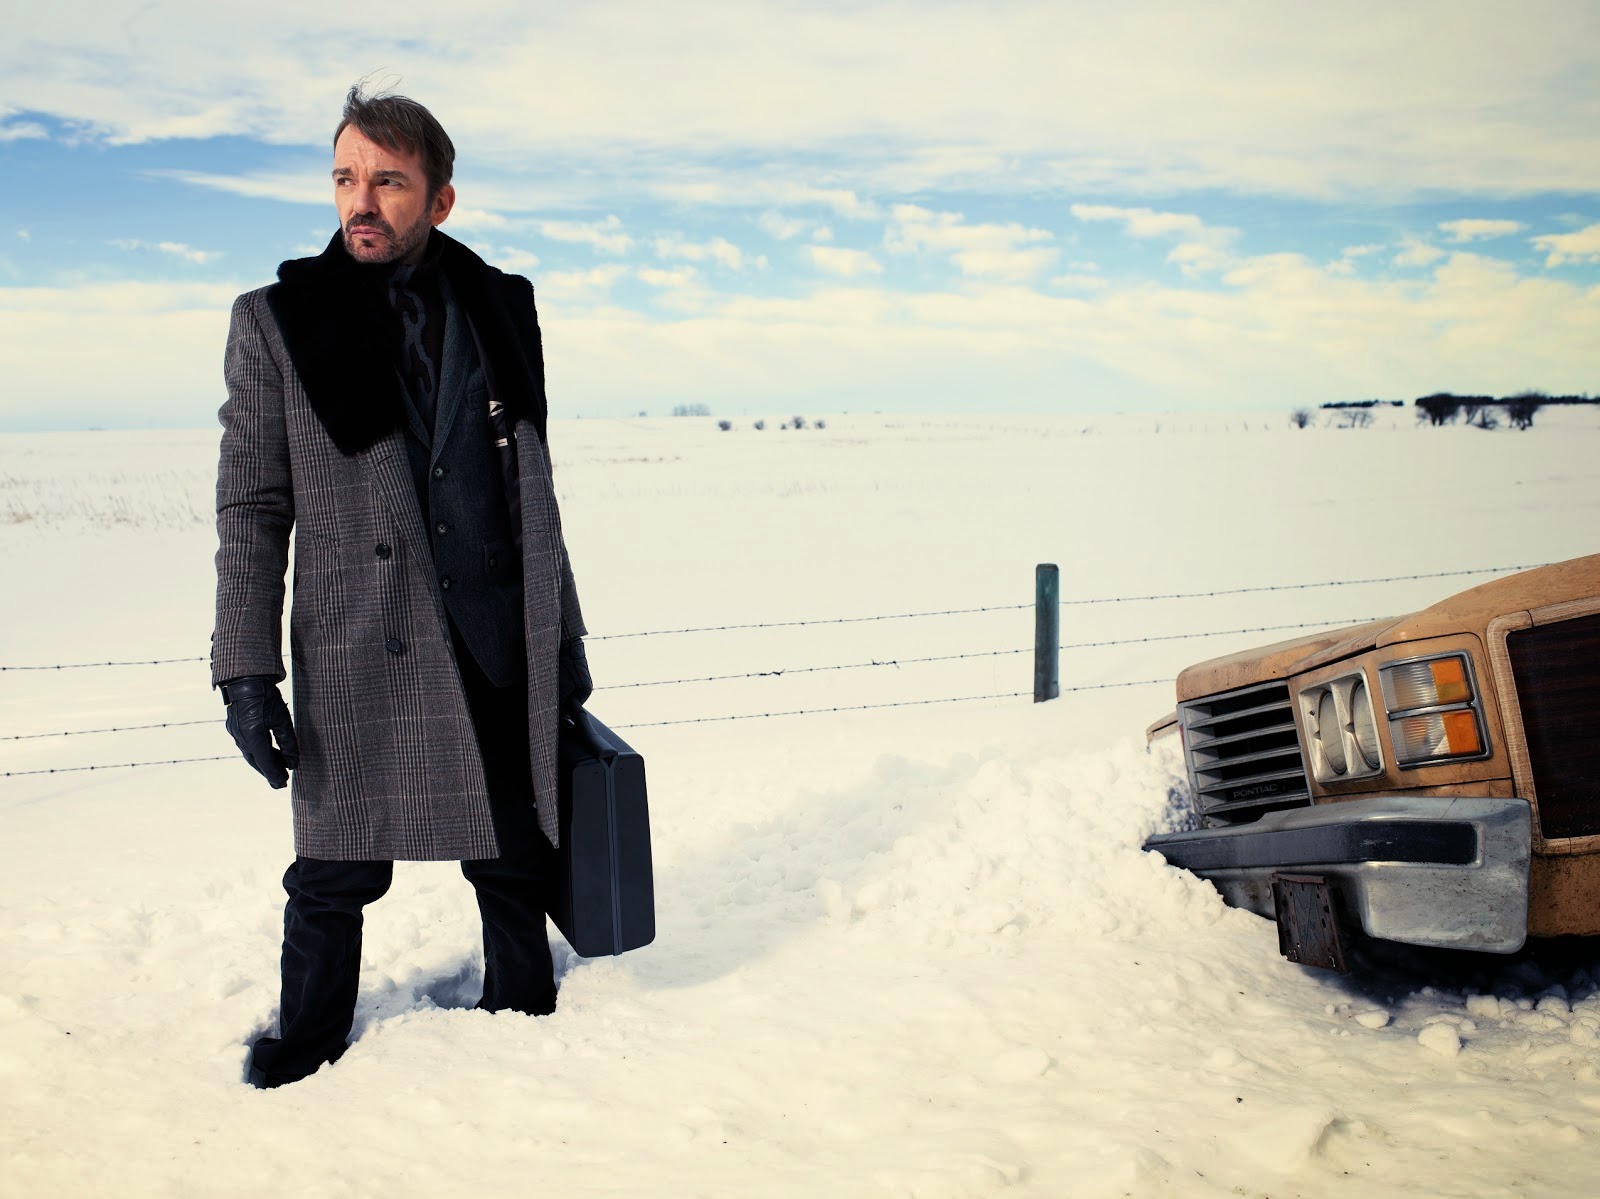  Fargo - Billy Bob Thornton Previews his Mysterious Character & Talks About Making the Series “Its Own Animal” 